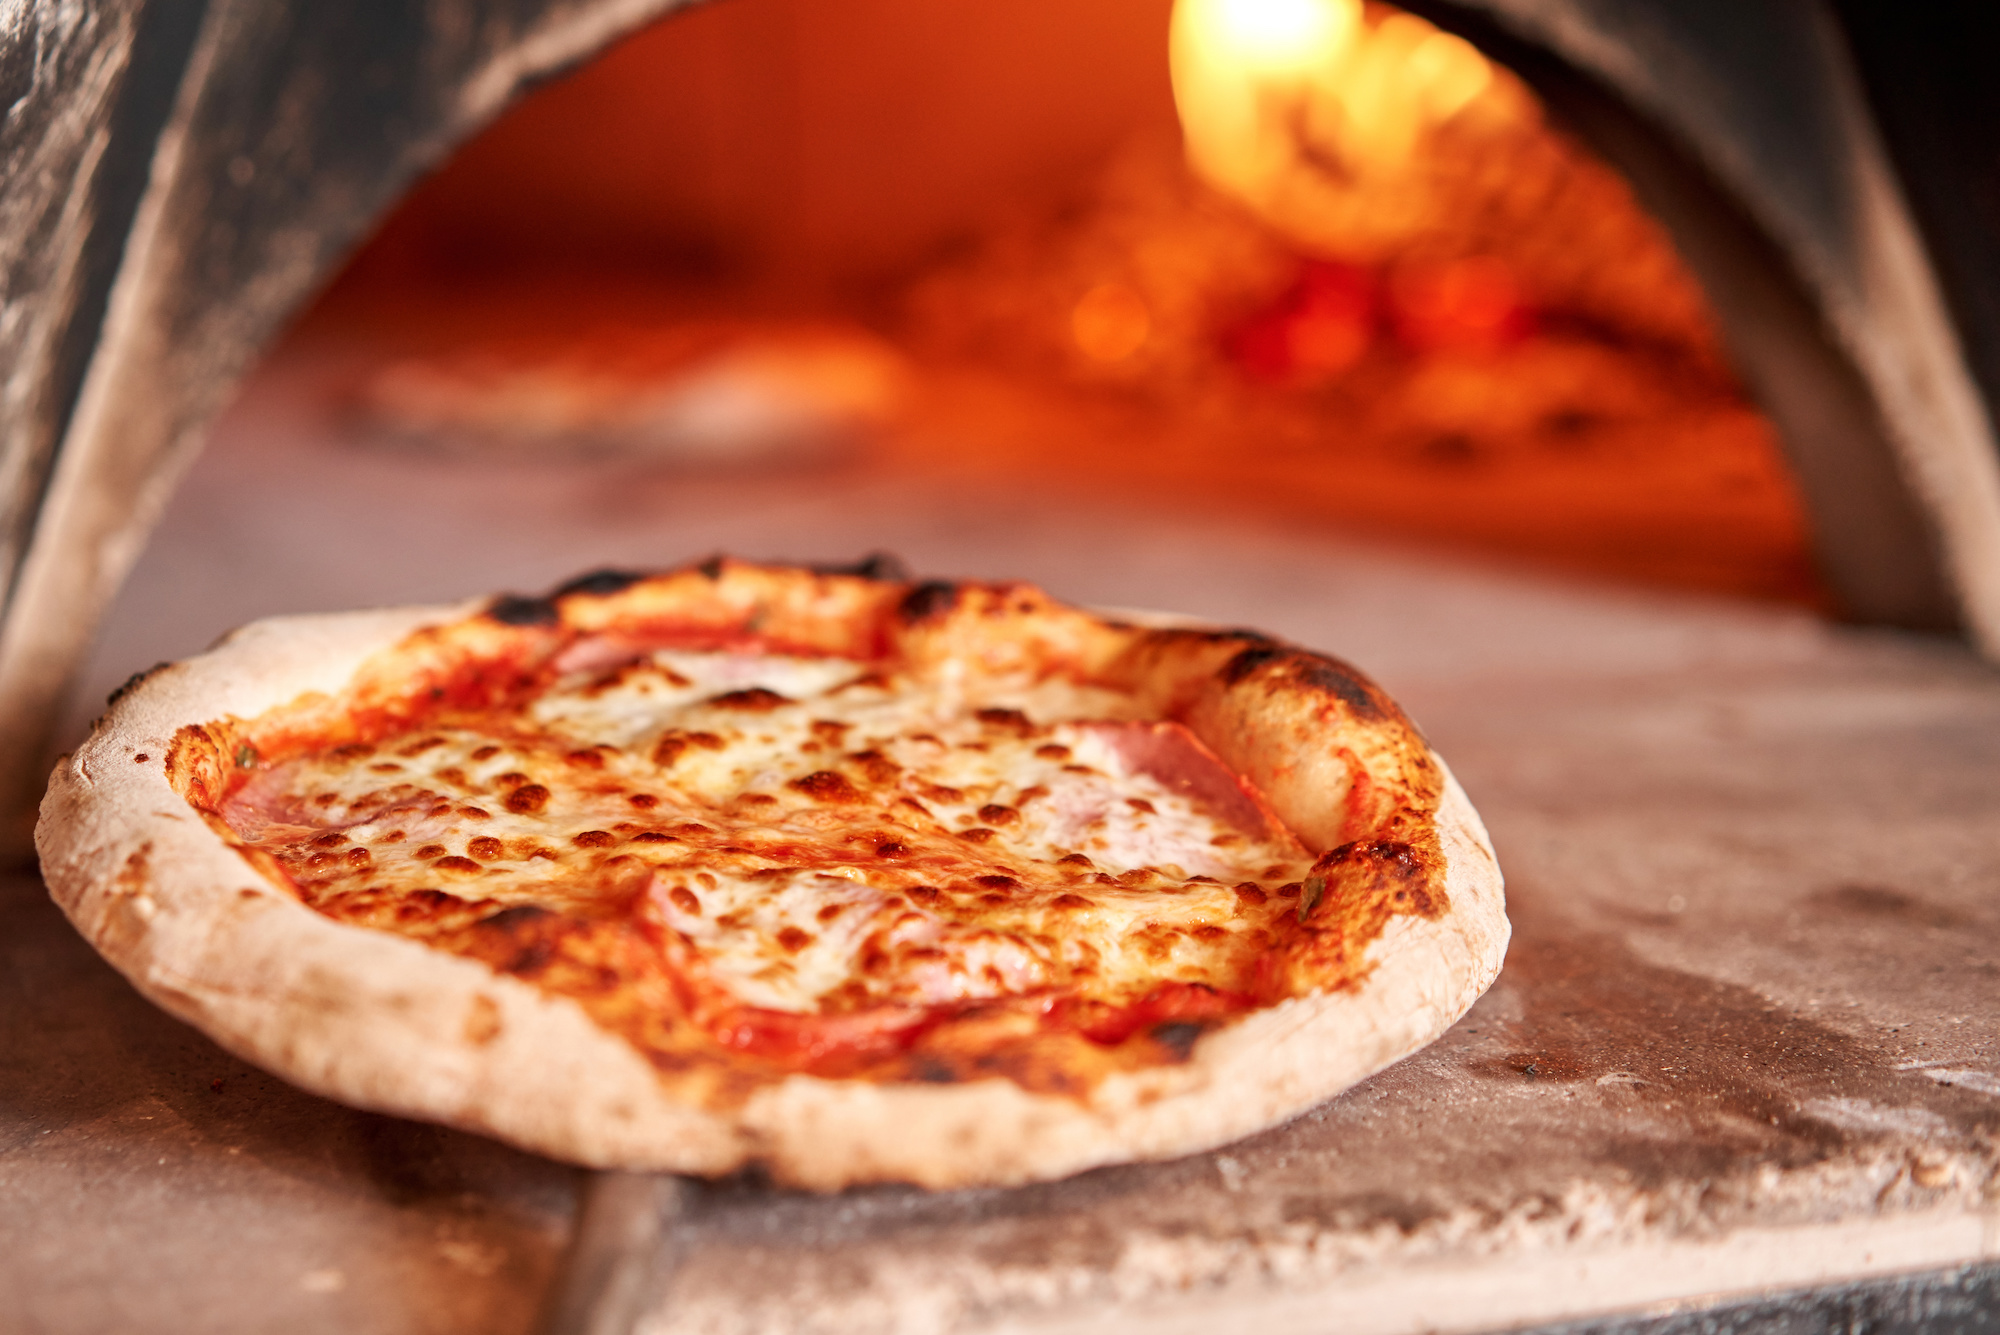 Baked tasty margherita pizza in Traditional wood oven in Naples restaurant, Italy. Original neapolitan pizza. Red hot coal